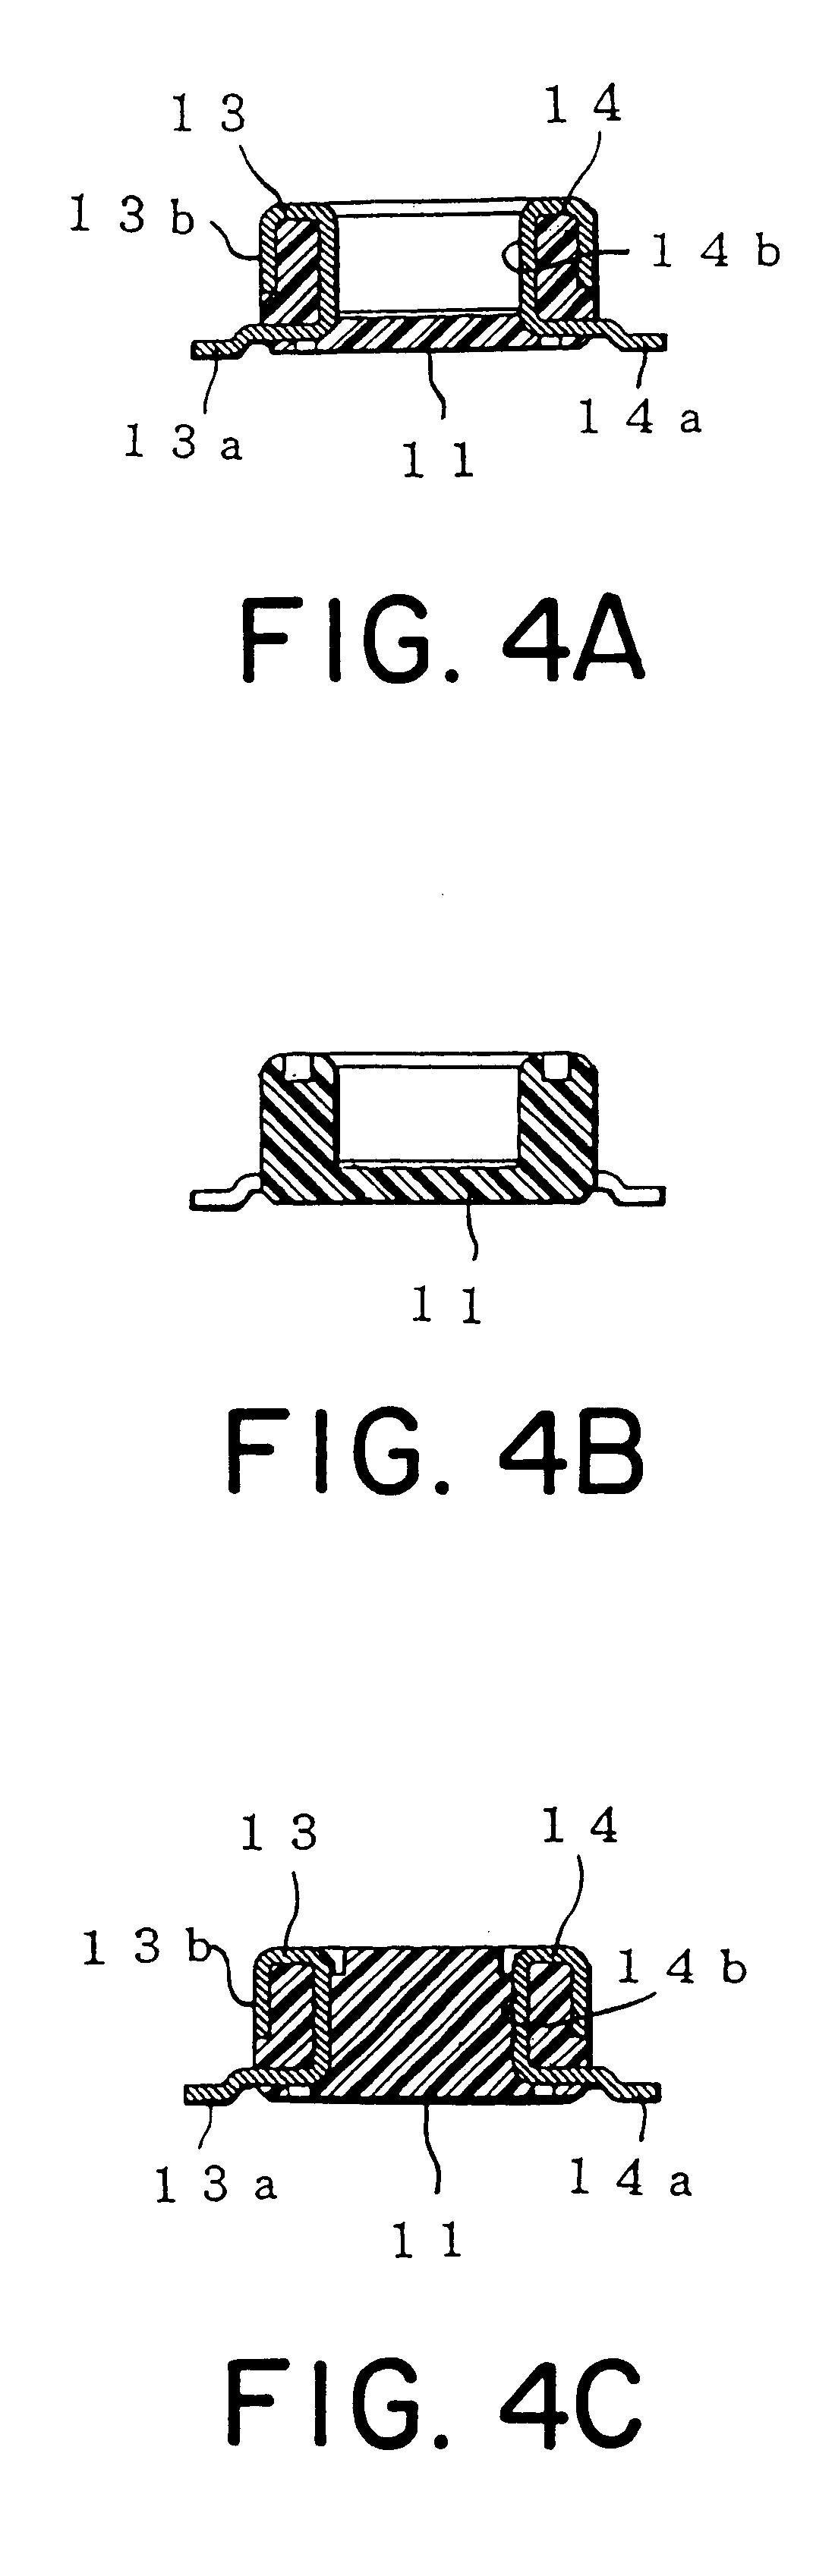 Locking mechanism for securely preventing disconnection between a plug and a receptacle